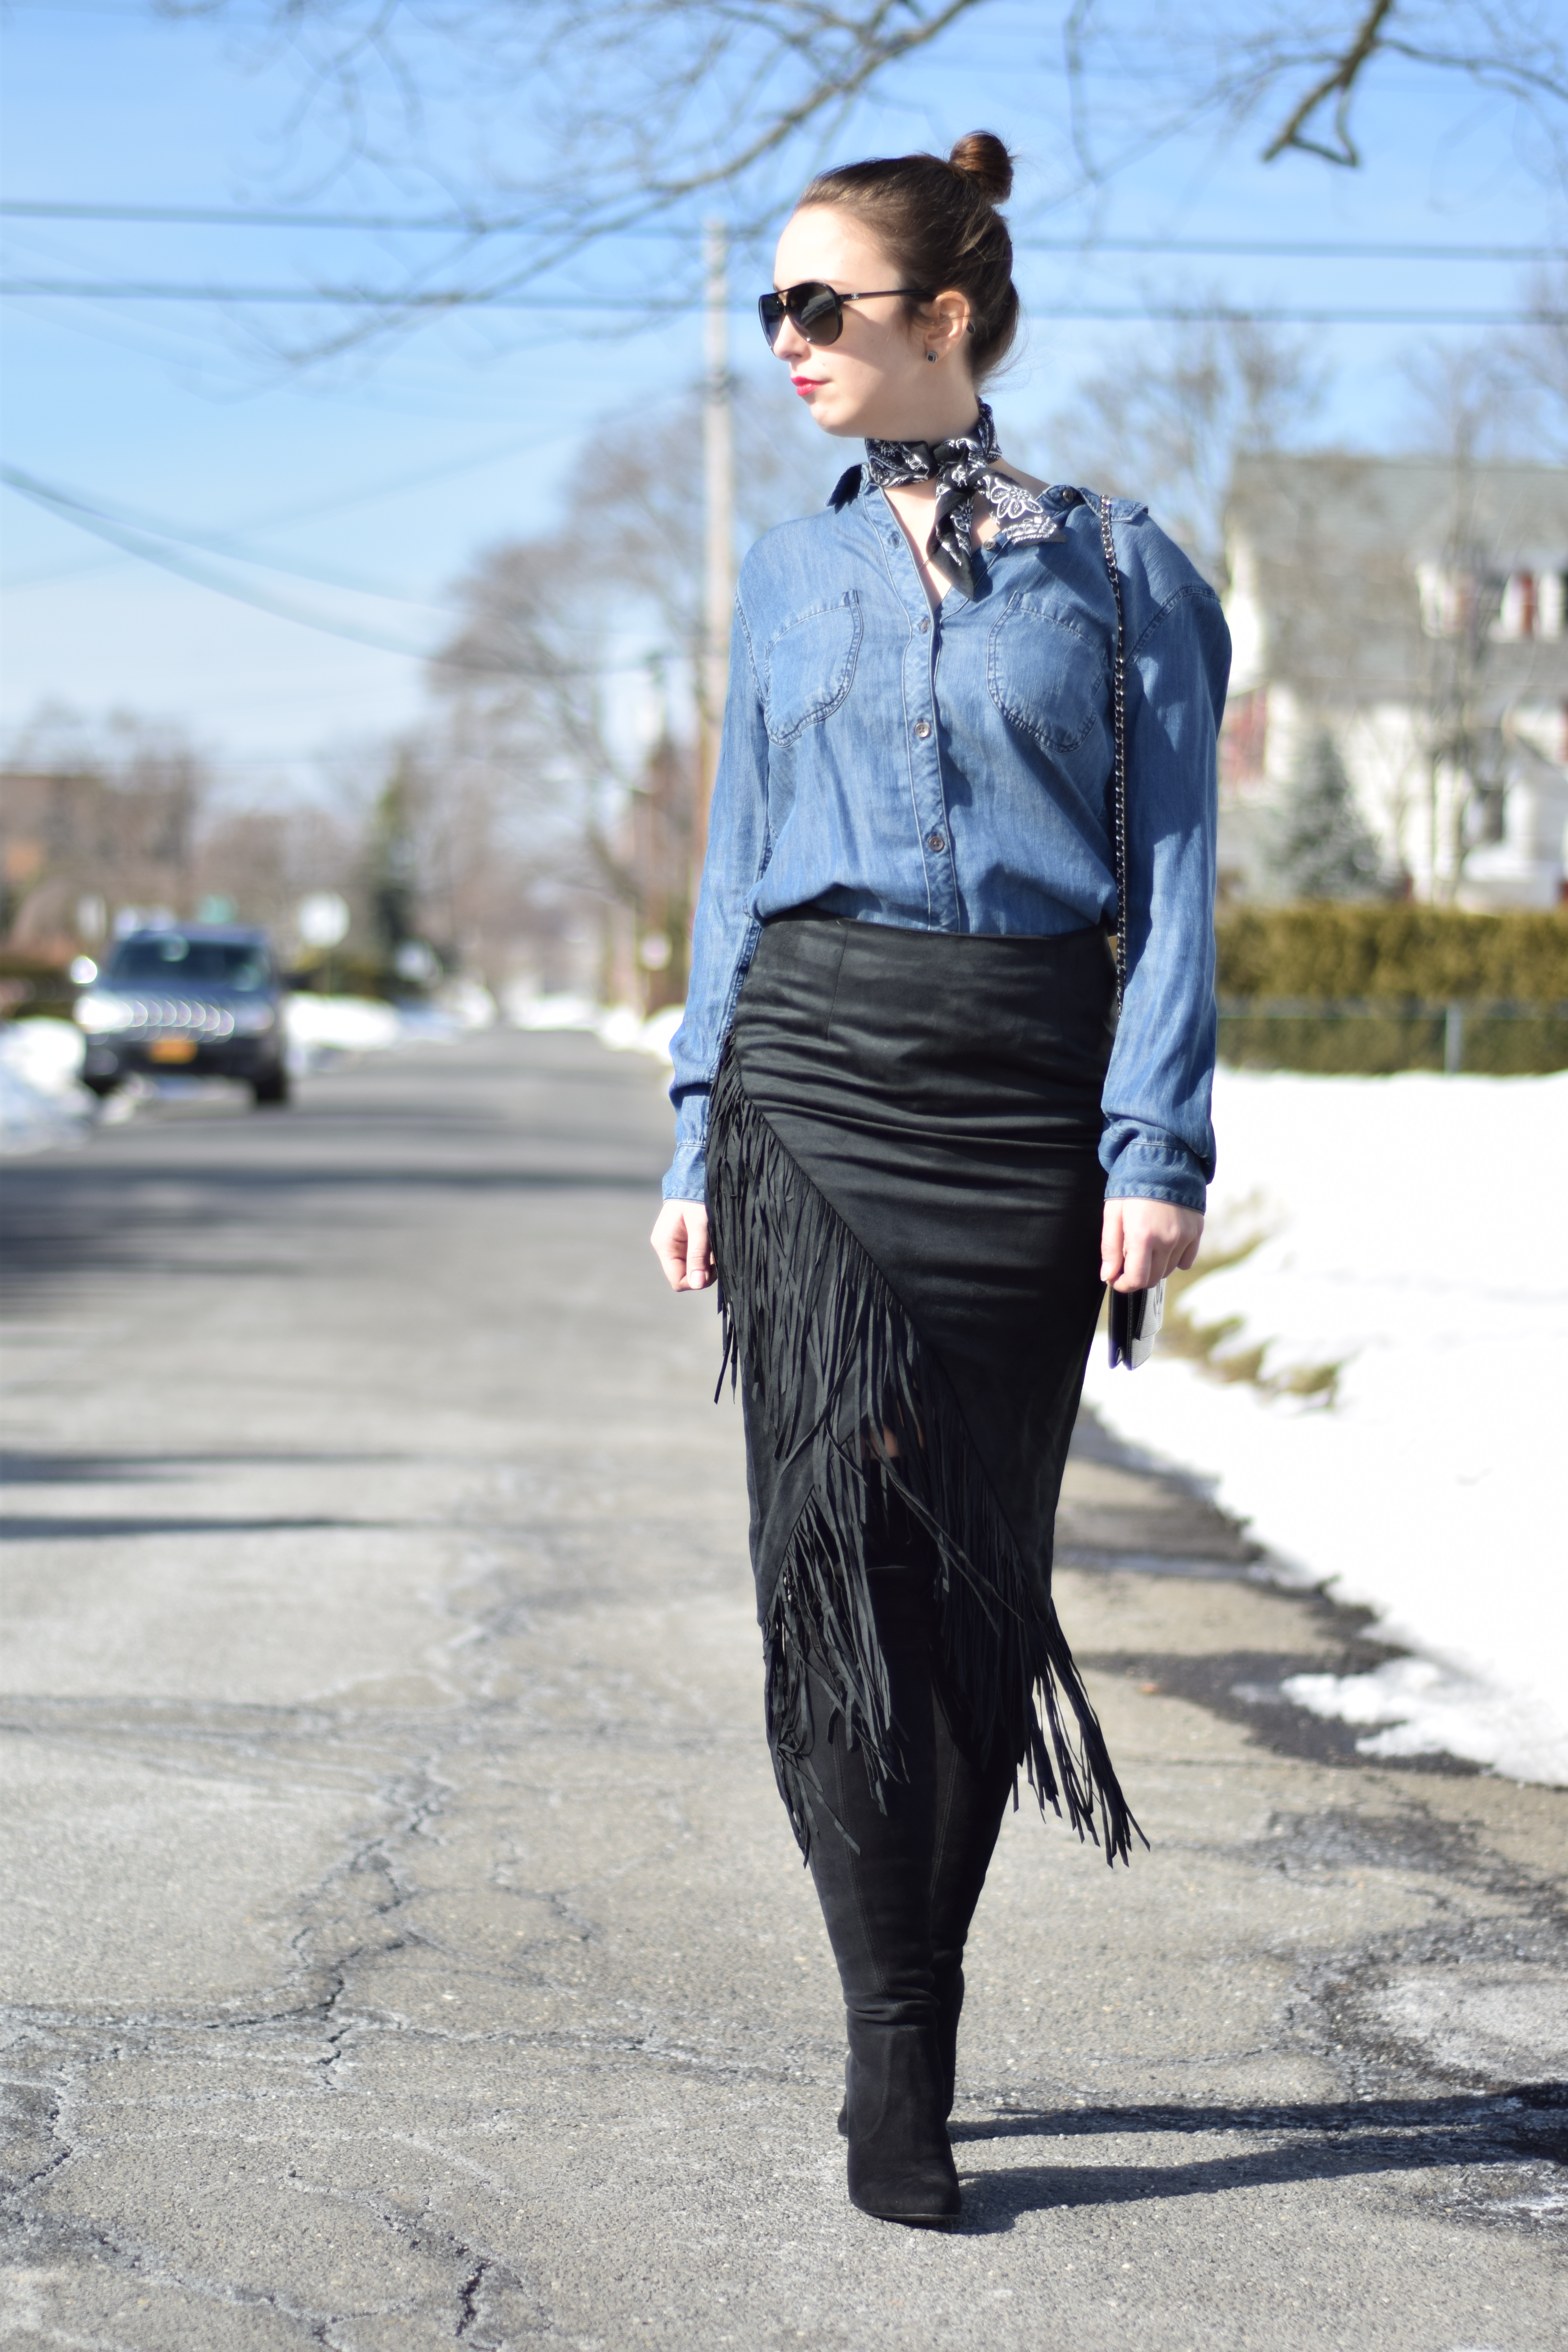 Rewear - Styling Interesting Items Again-Stuart Weitzman Boots-Fringe Skirt-Denim Shirt-Spring Style-Fall Style-Outfit-Westchester-Chanel